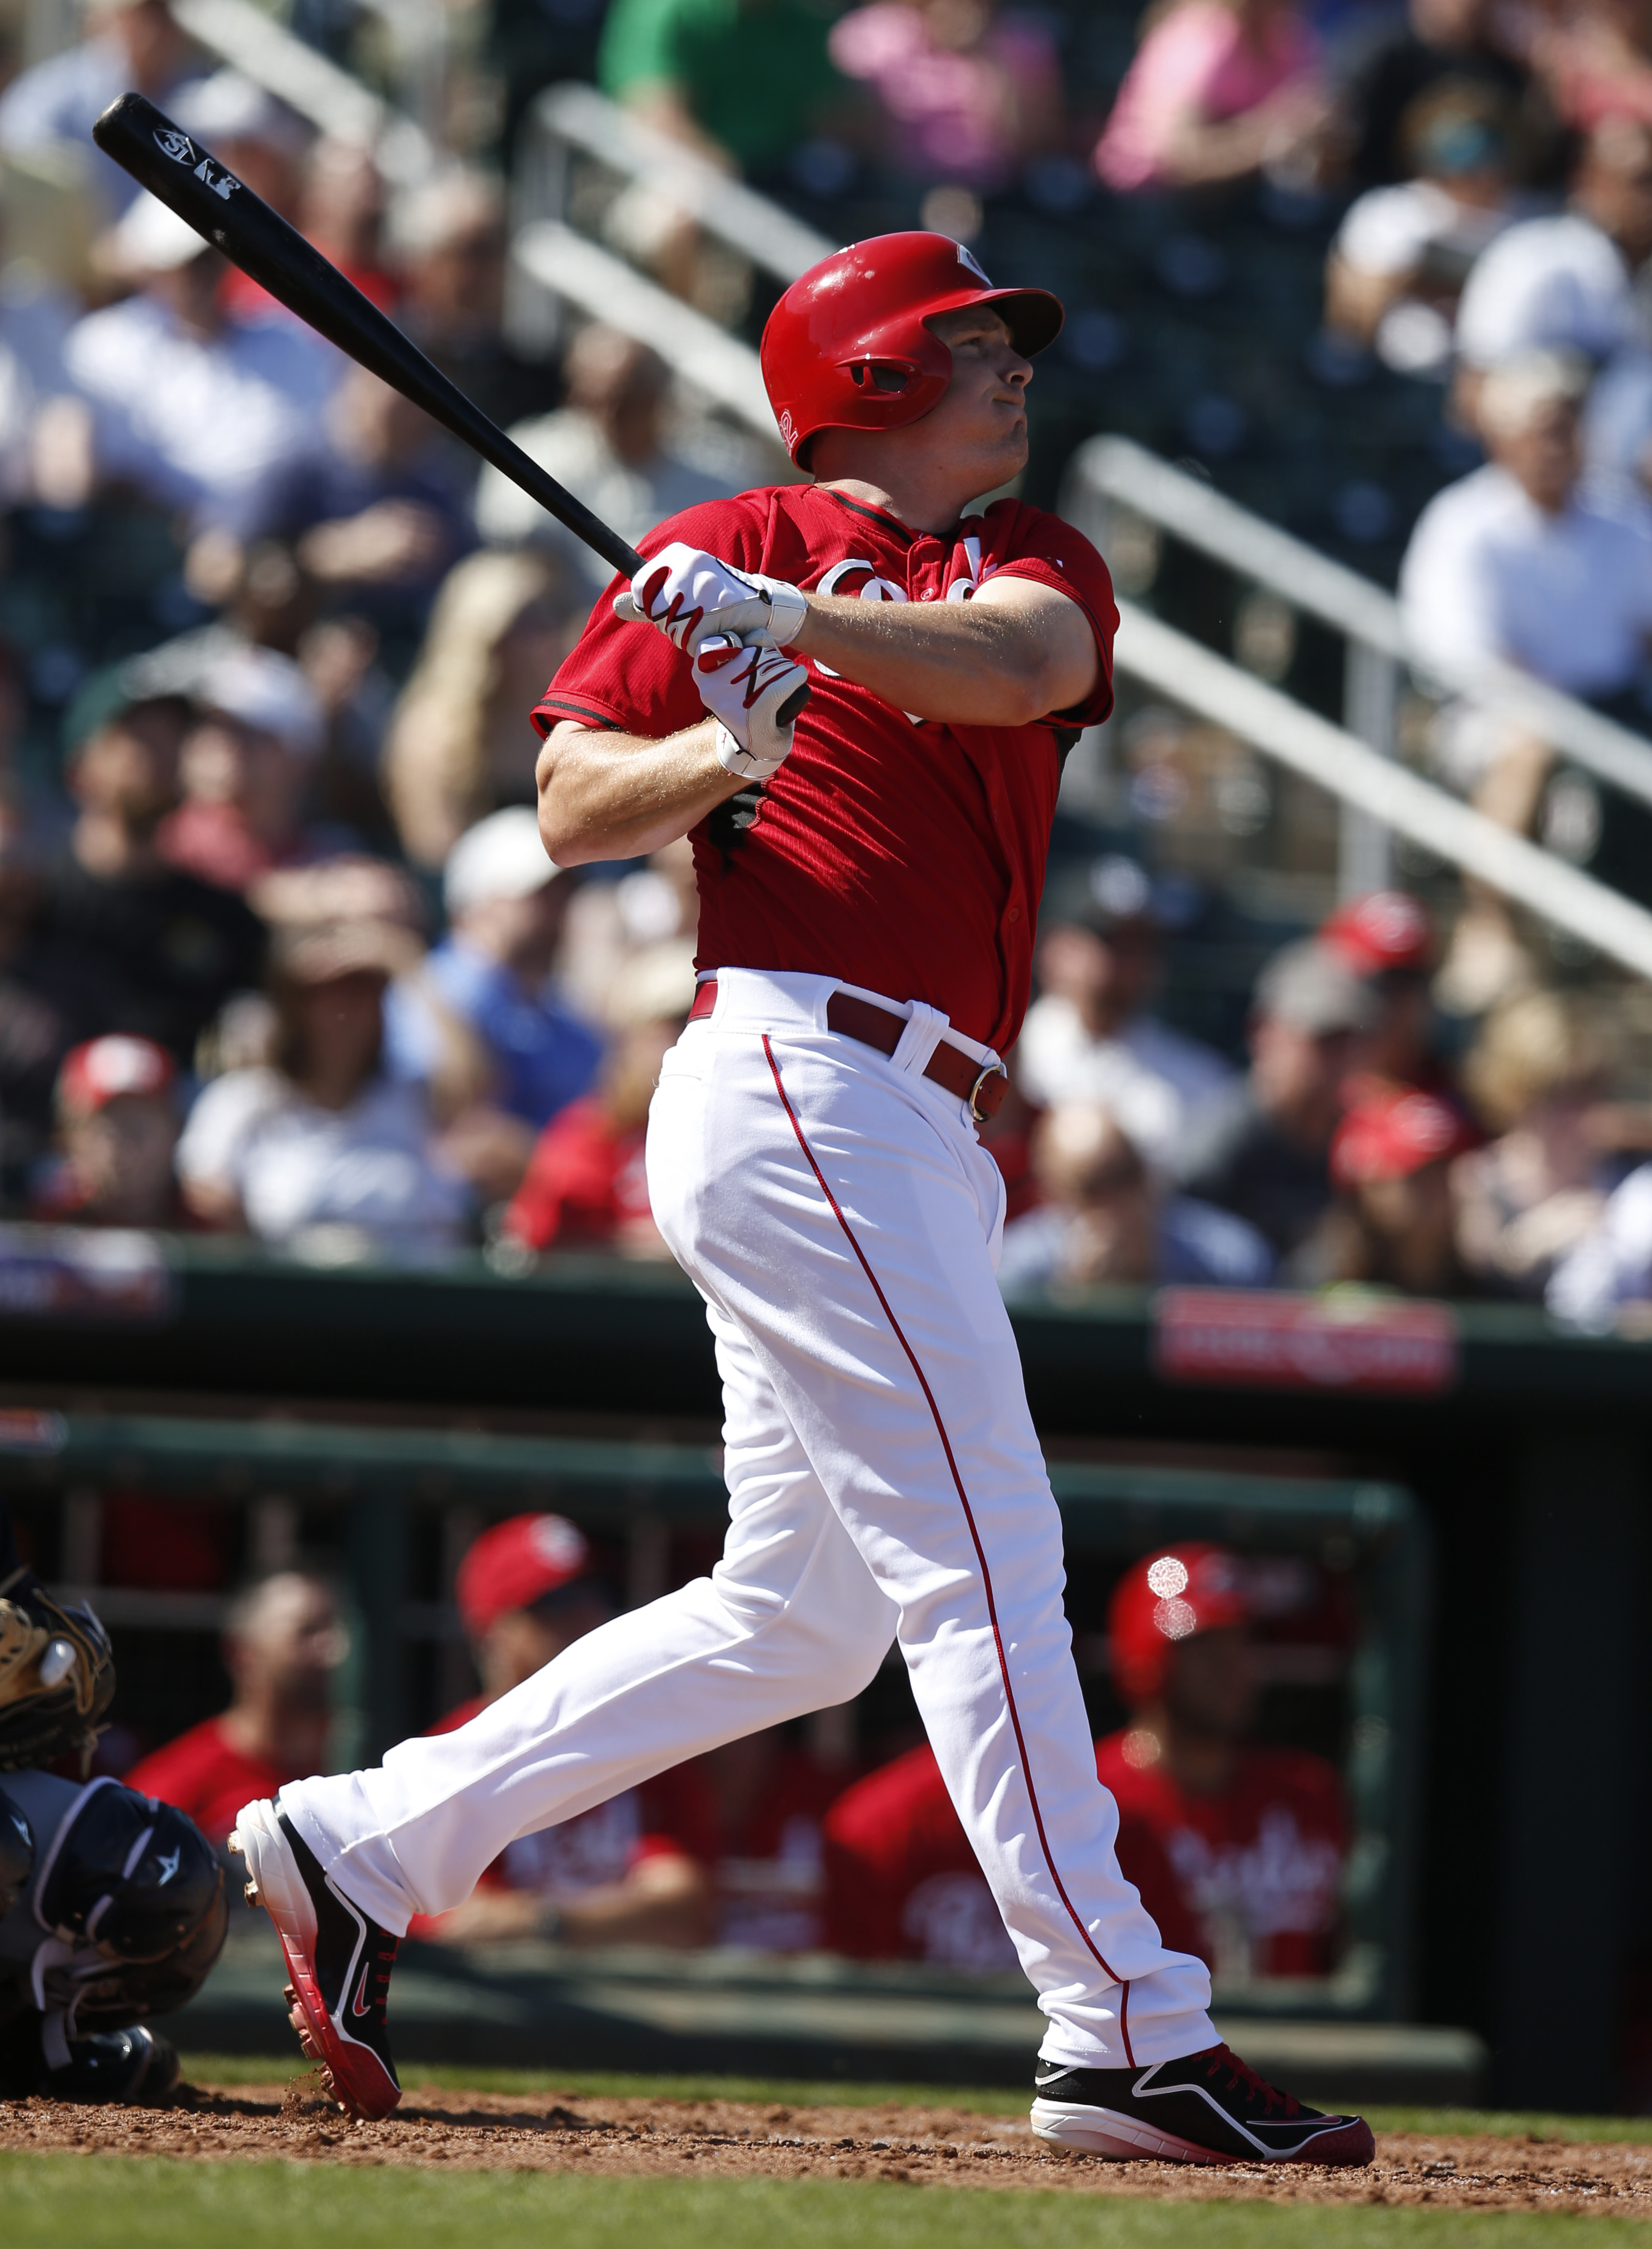 Jay Bruce homers, Reds beat Mariners 10-1